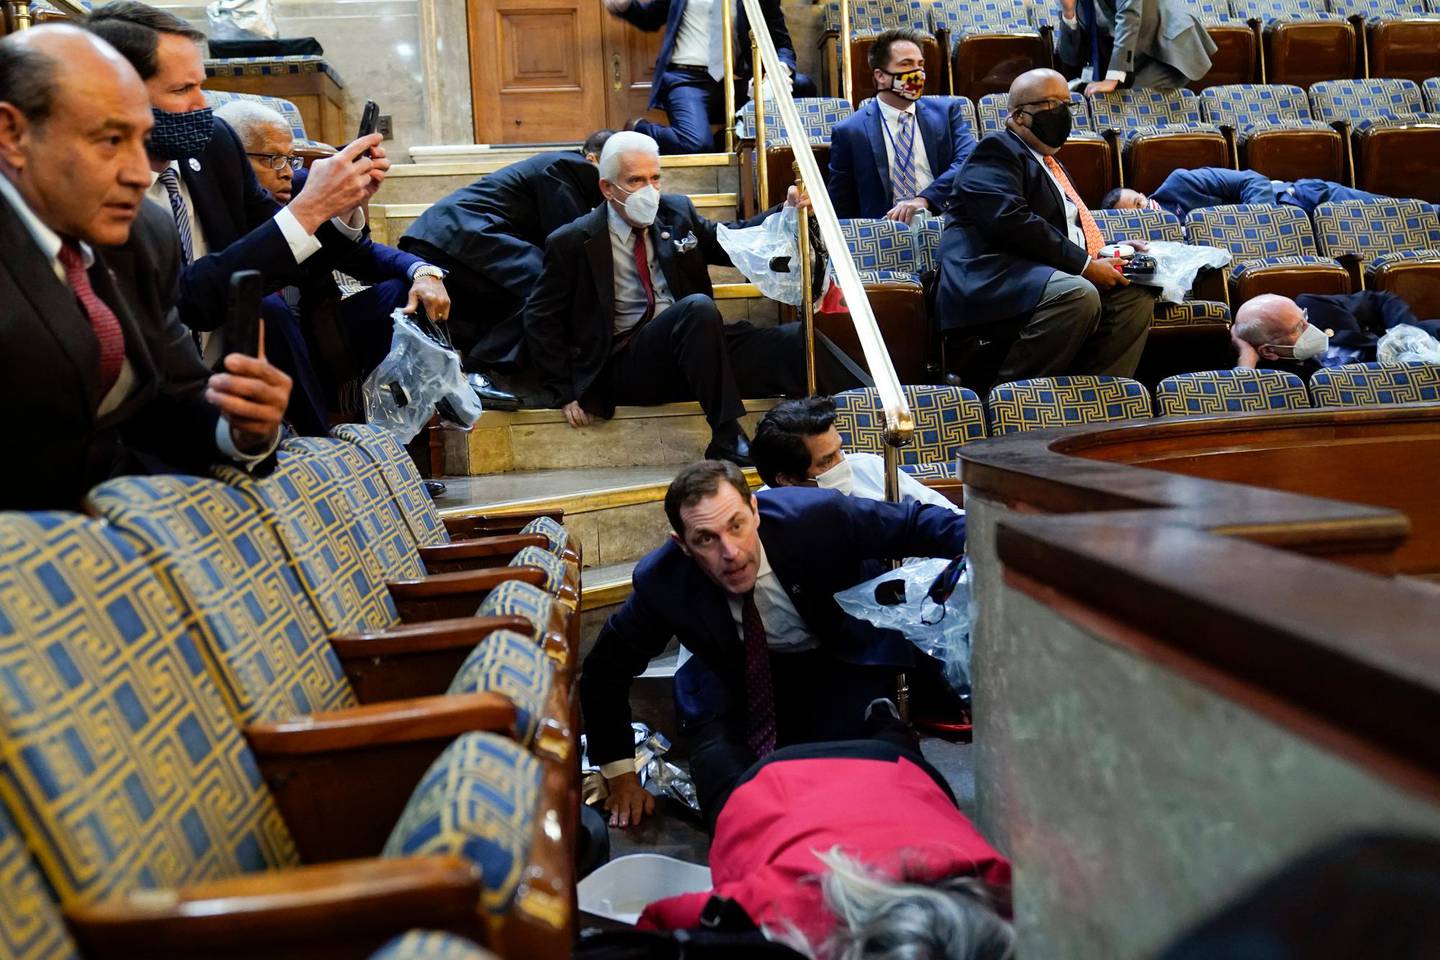 FILE - In this Jan. 6, 2021, file photo people shelter in the House gallery as rioters try to break into the House Chamber at the U.S. Capitol. Arguments begin Tuesday, Feb. 9, in the impeachment trial of Donald Trump on allegations that he incited the violent mob that stormed the U.S. Capitol on Jan. 6. (AP Photo/Andrew Harnik, File)